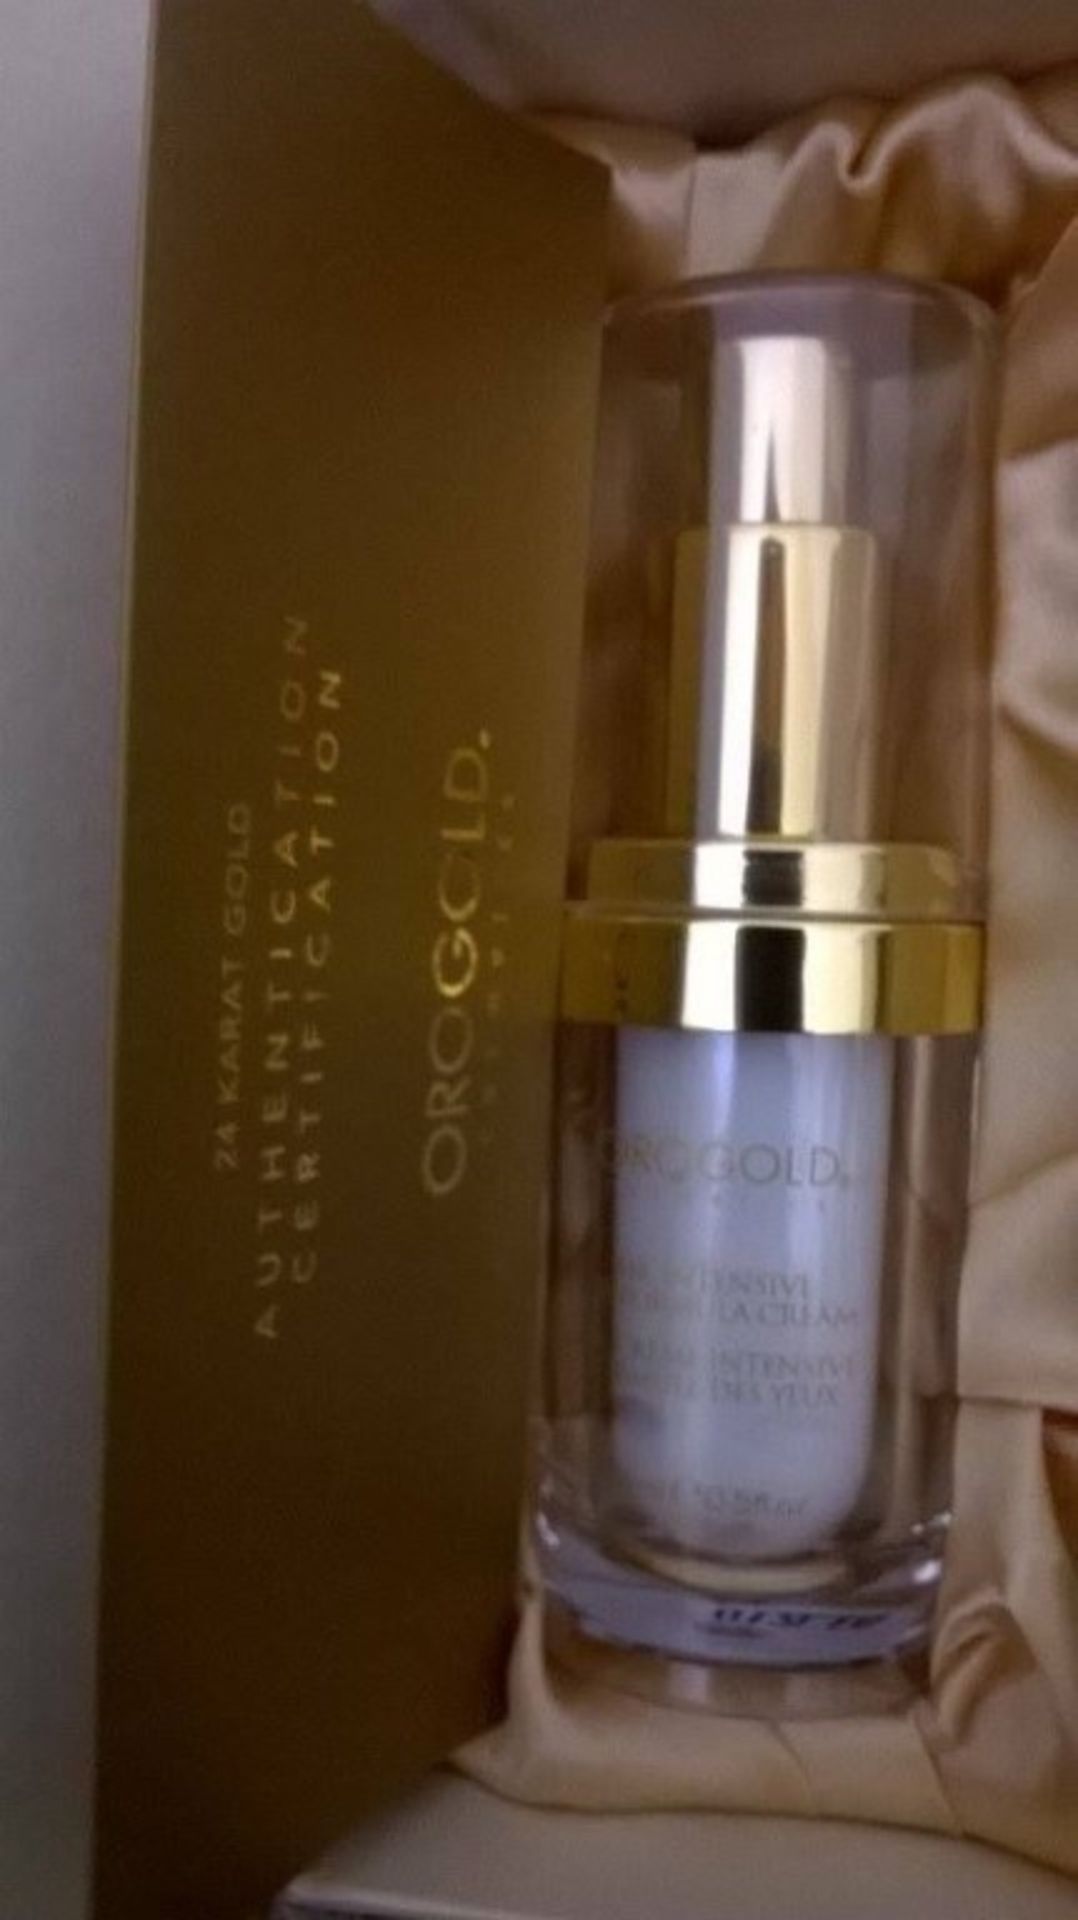 1 x Orogold 24K Intense Eye Formula Cream 15g - Reduces the Appearance of Dark Circles Around the - Image 3 of 4